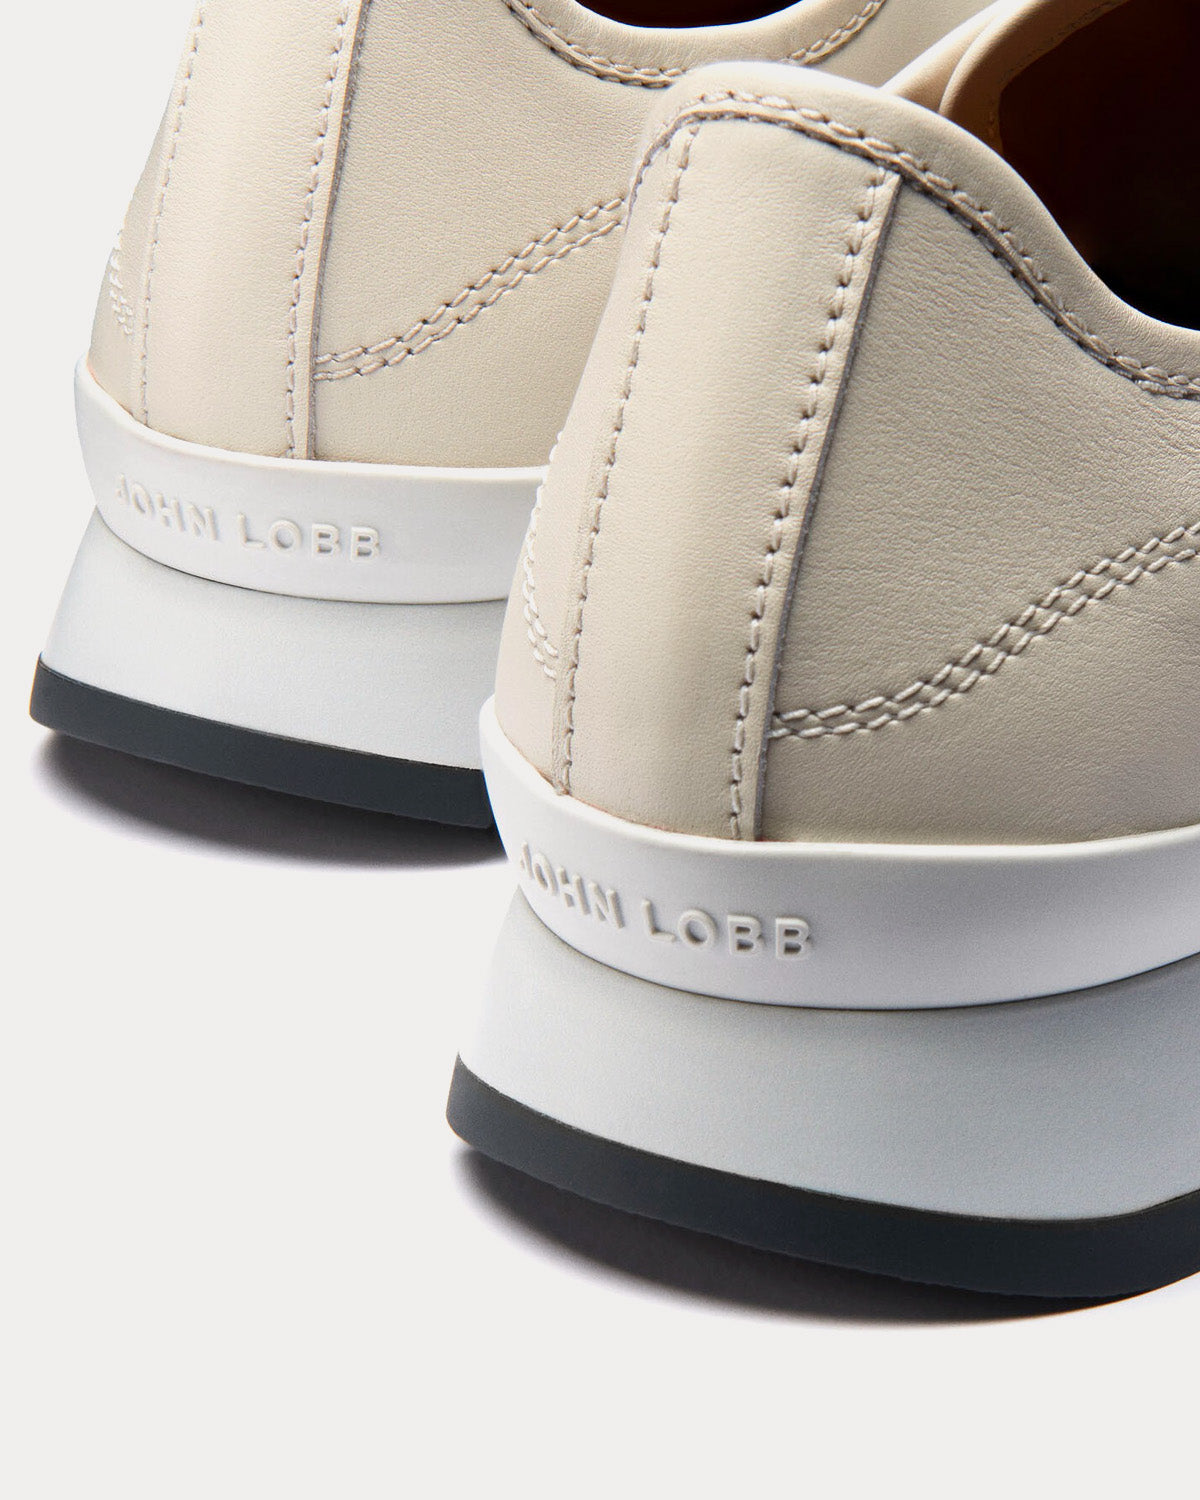 John Lobb - Foundry II Natural Calf Leather Off-White Low Top Sneakers